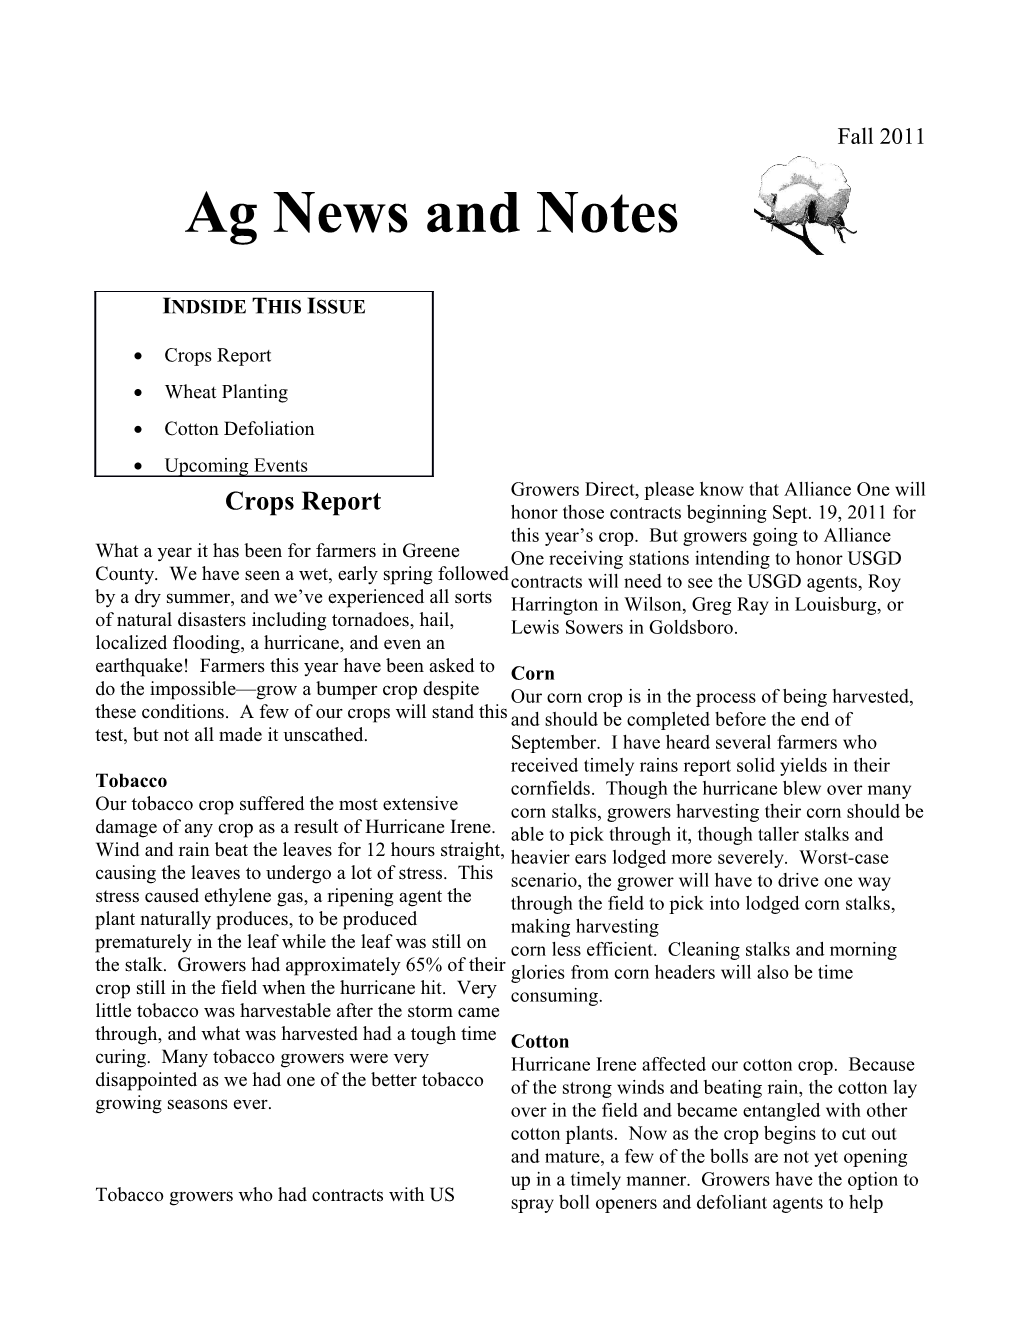 Ag News and Notes